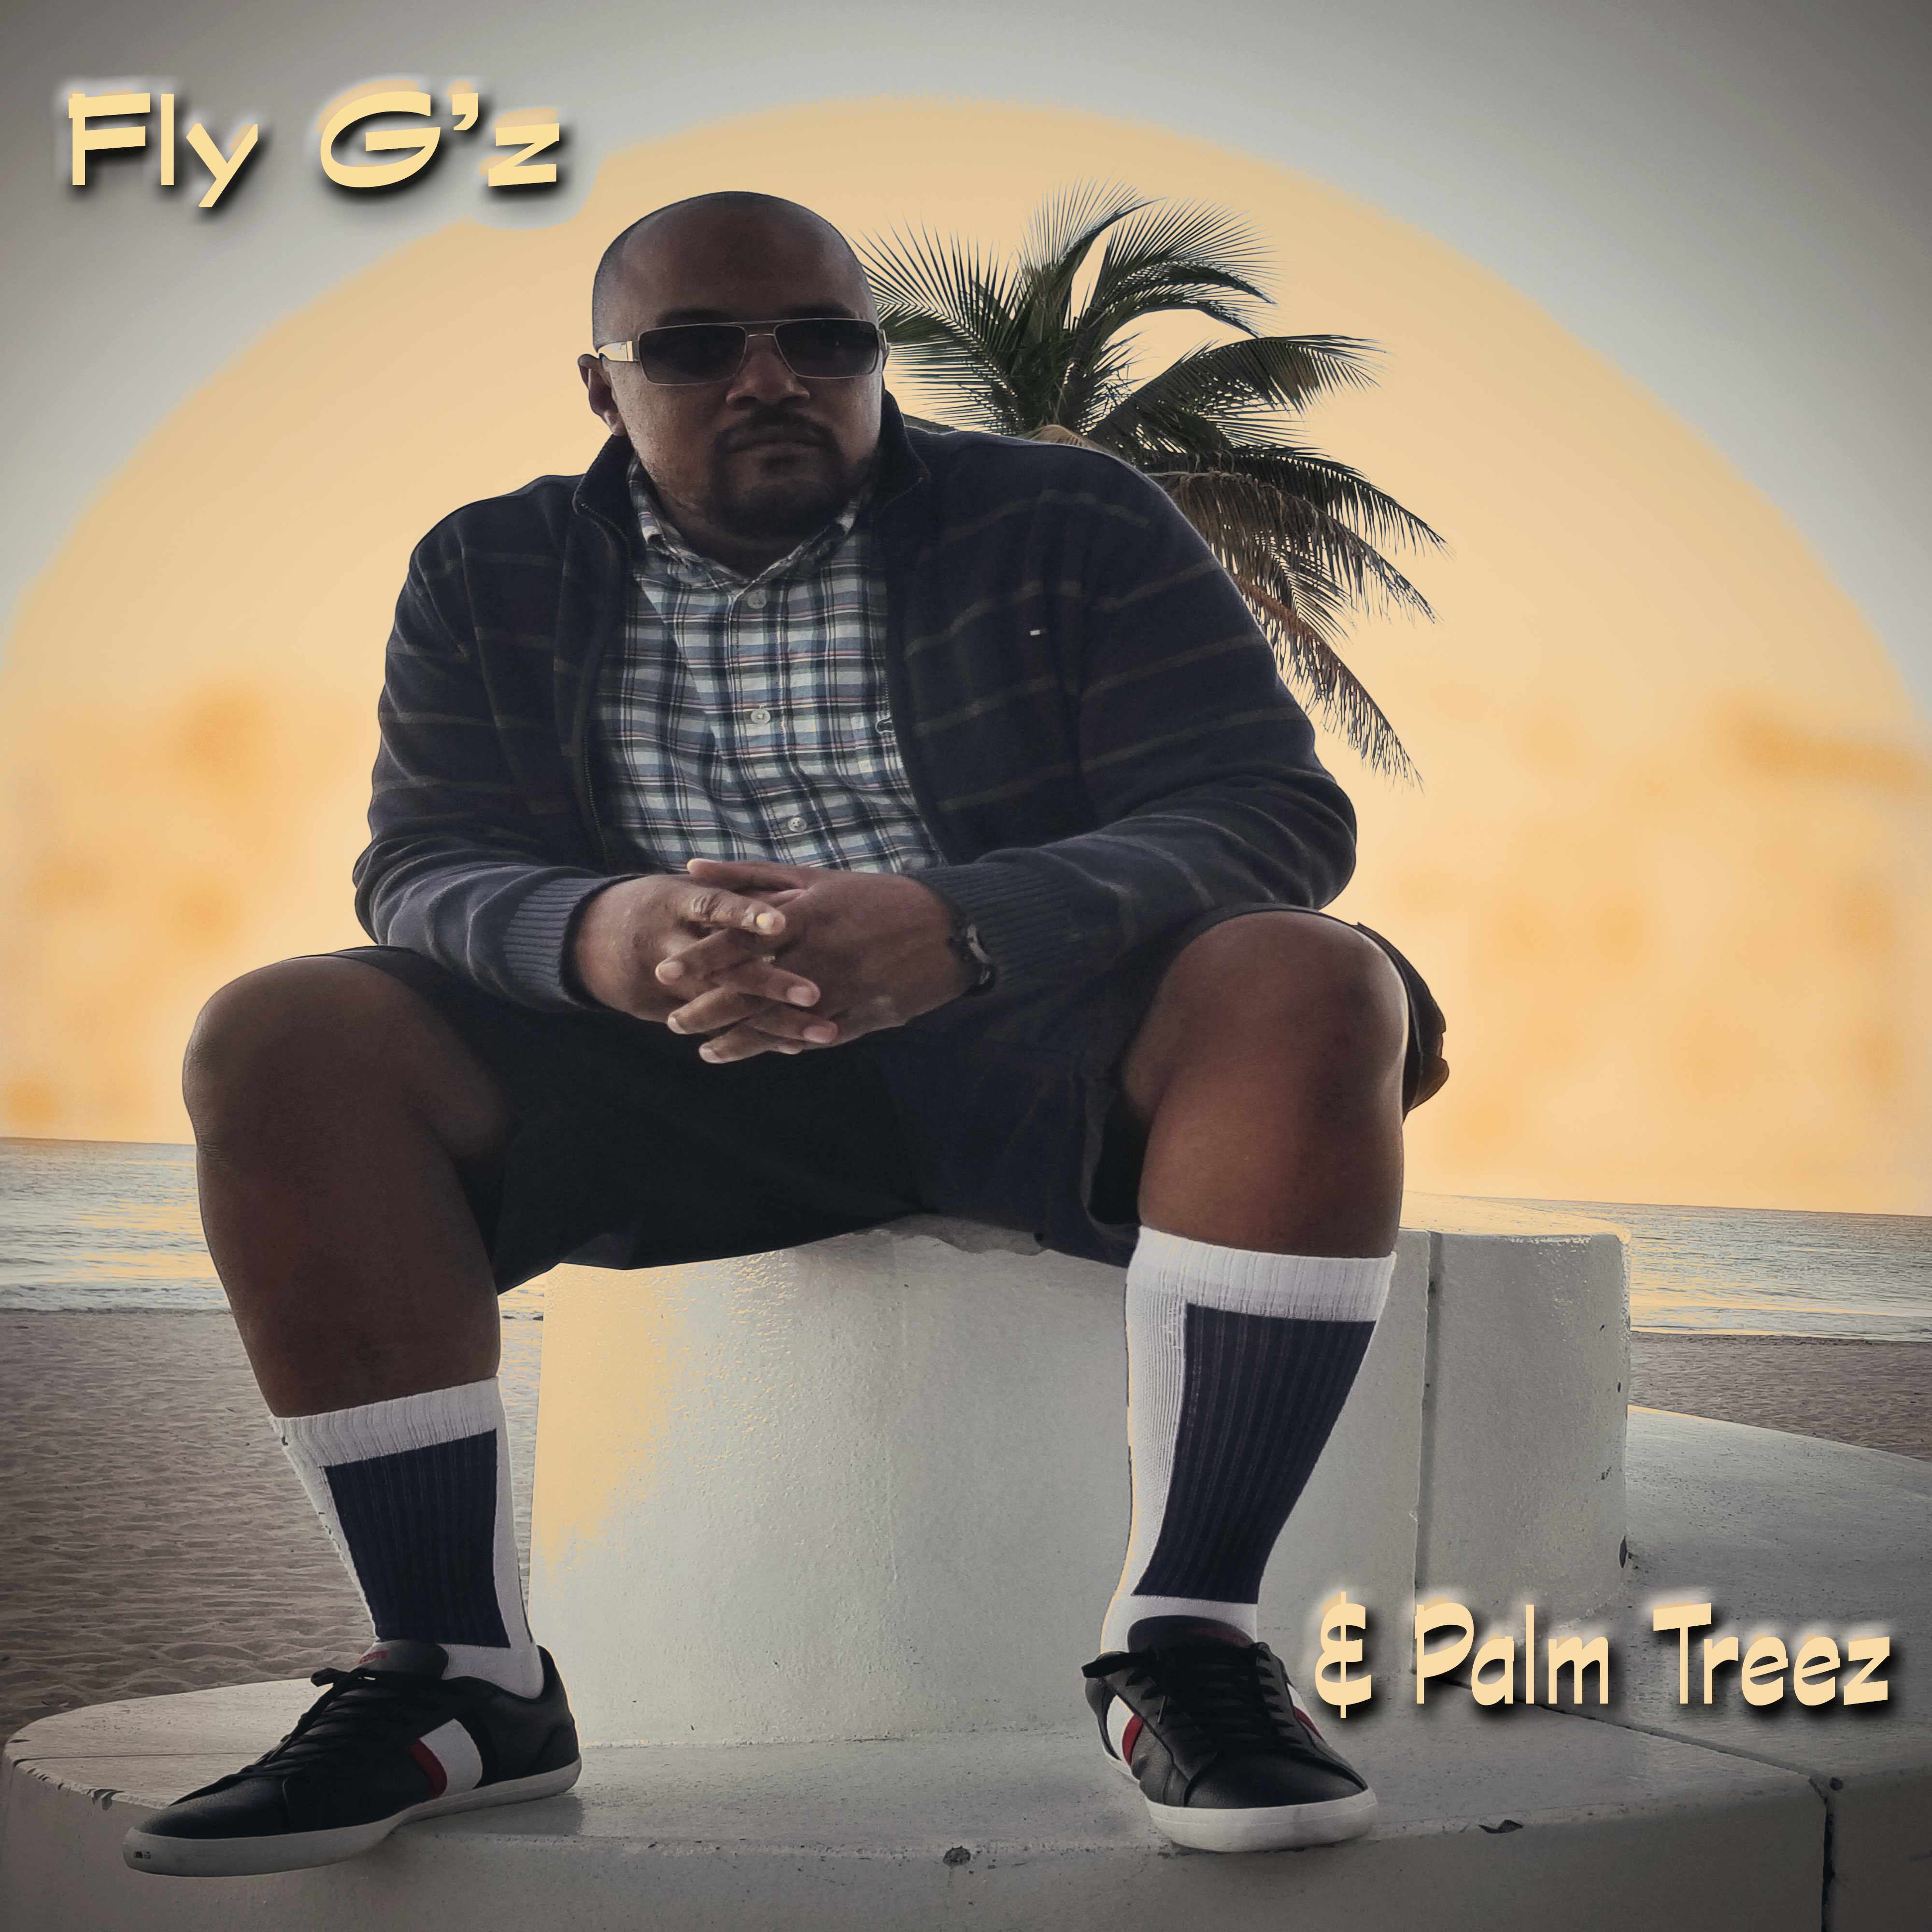 FLy G'z and Palm Treez Out Now!